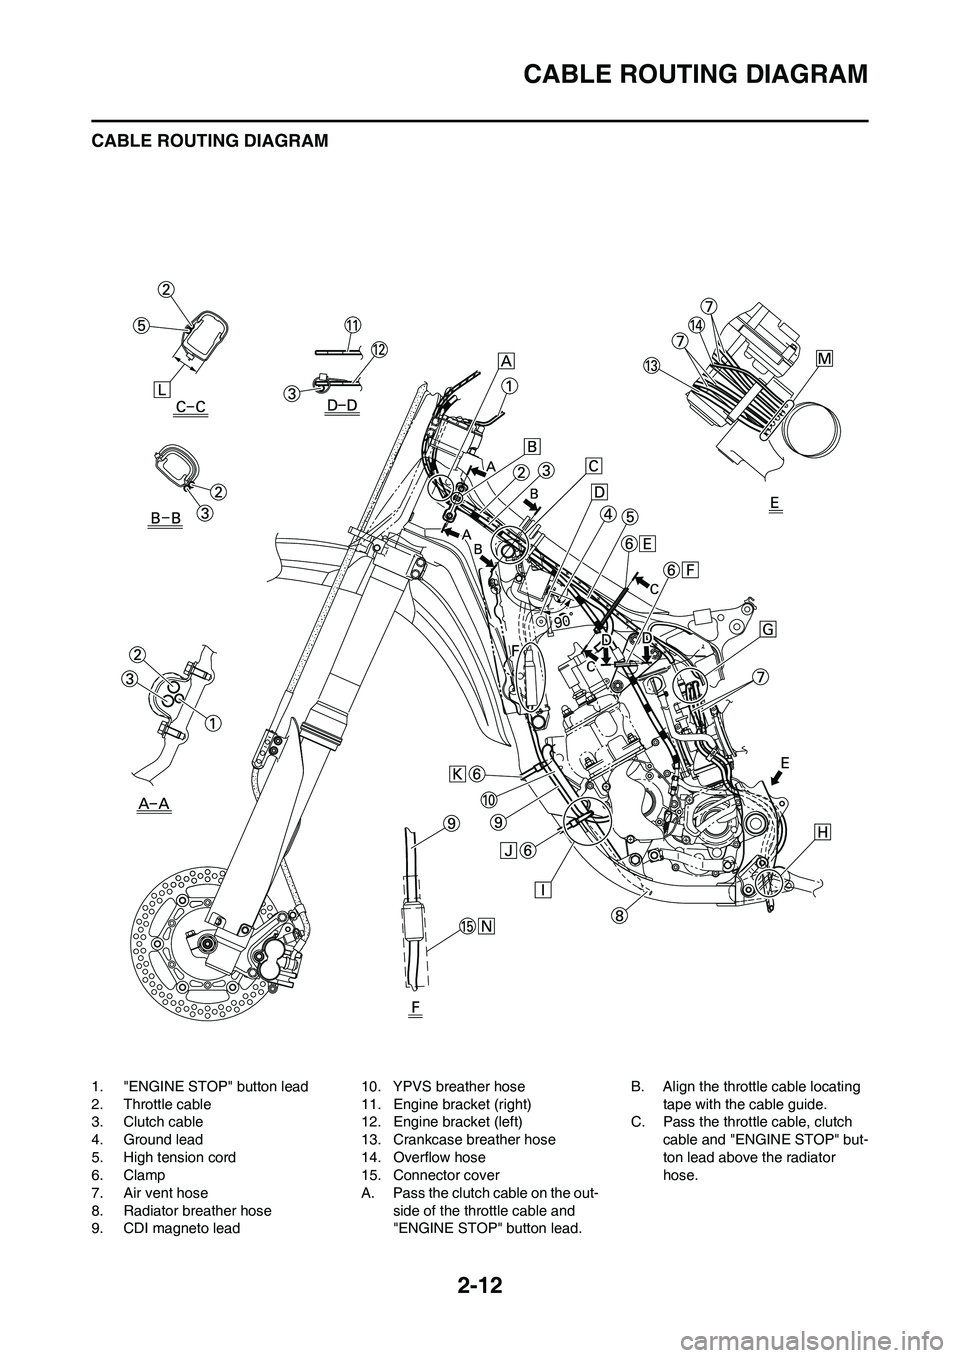 YAMAHA YZ125LC 2010 User Guide 2-12
CABLE ROUTING DIAGRAM
CABLE ROUTING DIAGRAM
1. "ENGINE STOP" button lead
2. Throttle cable
3. Clutch cable
4. Ground lead
5. High tension cord
6. Clamp
7. Air vent hose
8. Radiator breather hose
